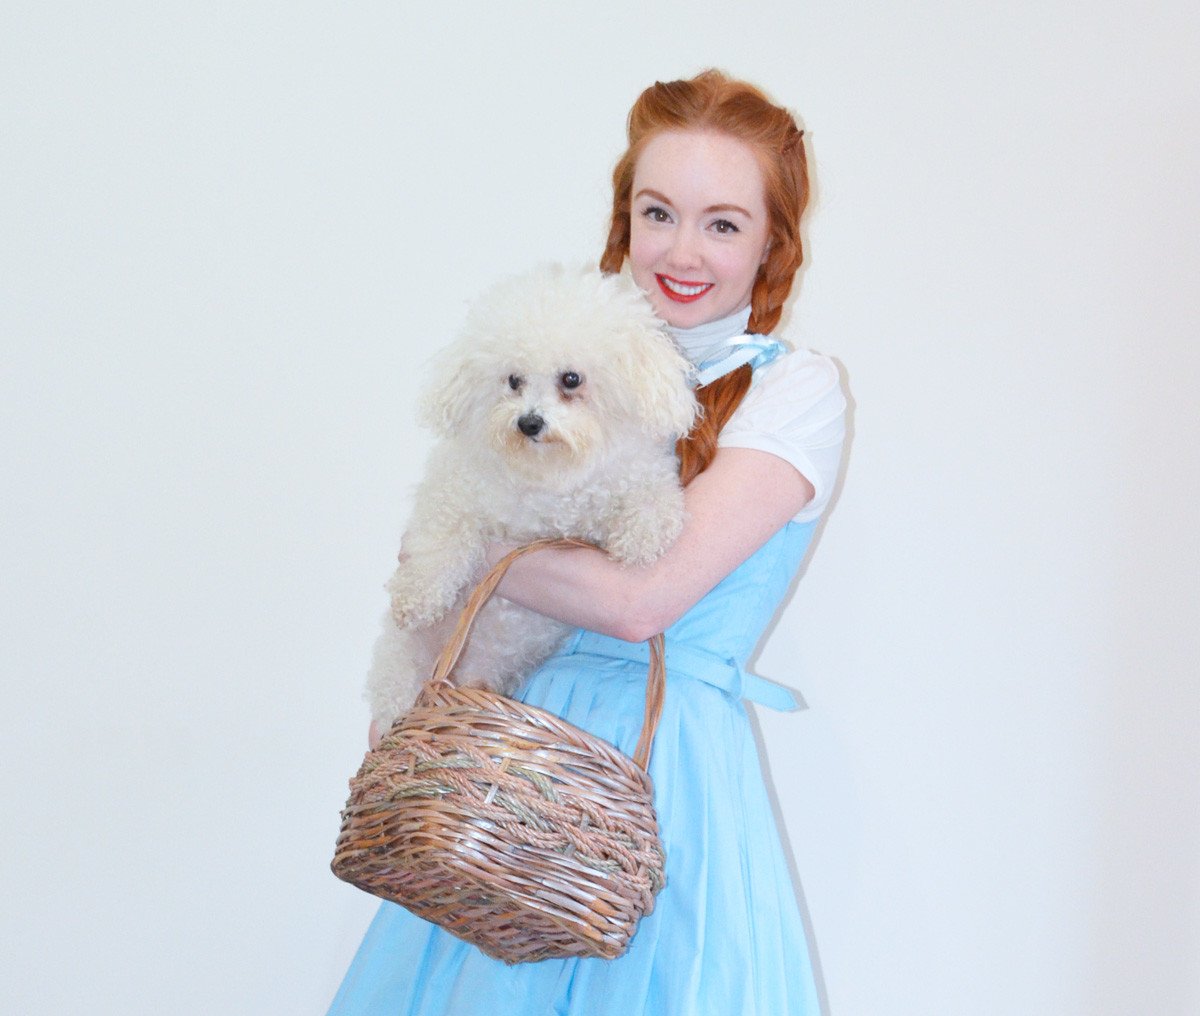 Dorothy from the Wizard of Oz - fancy dress